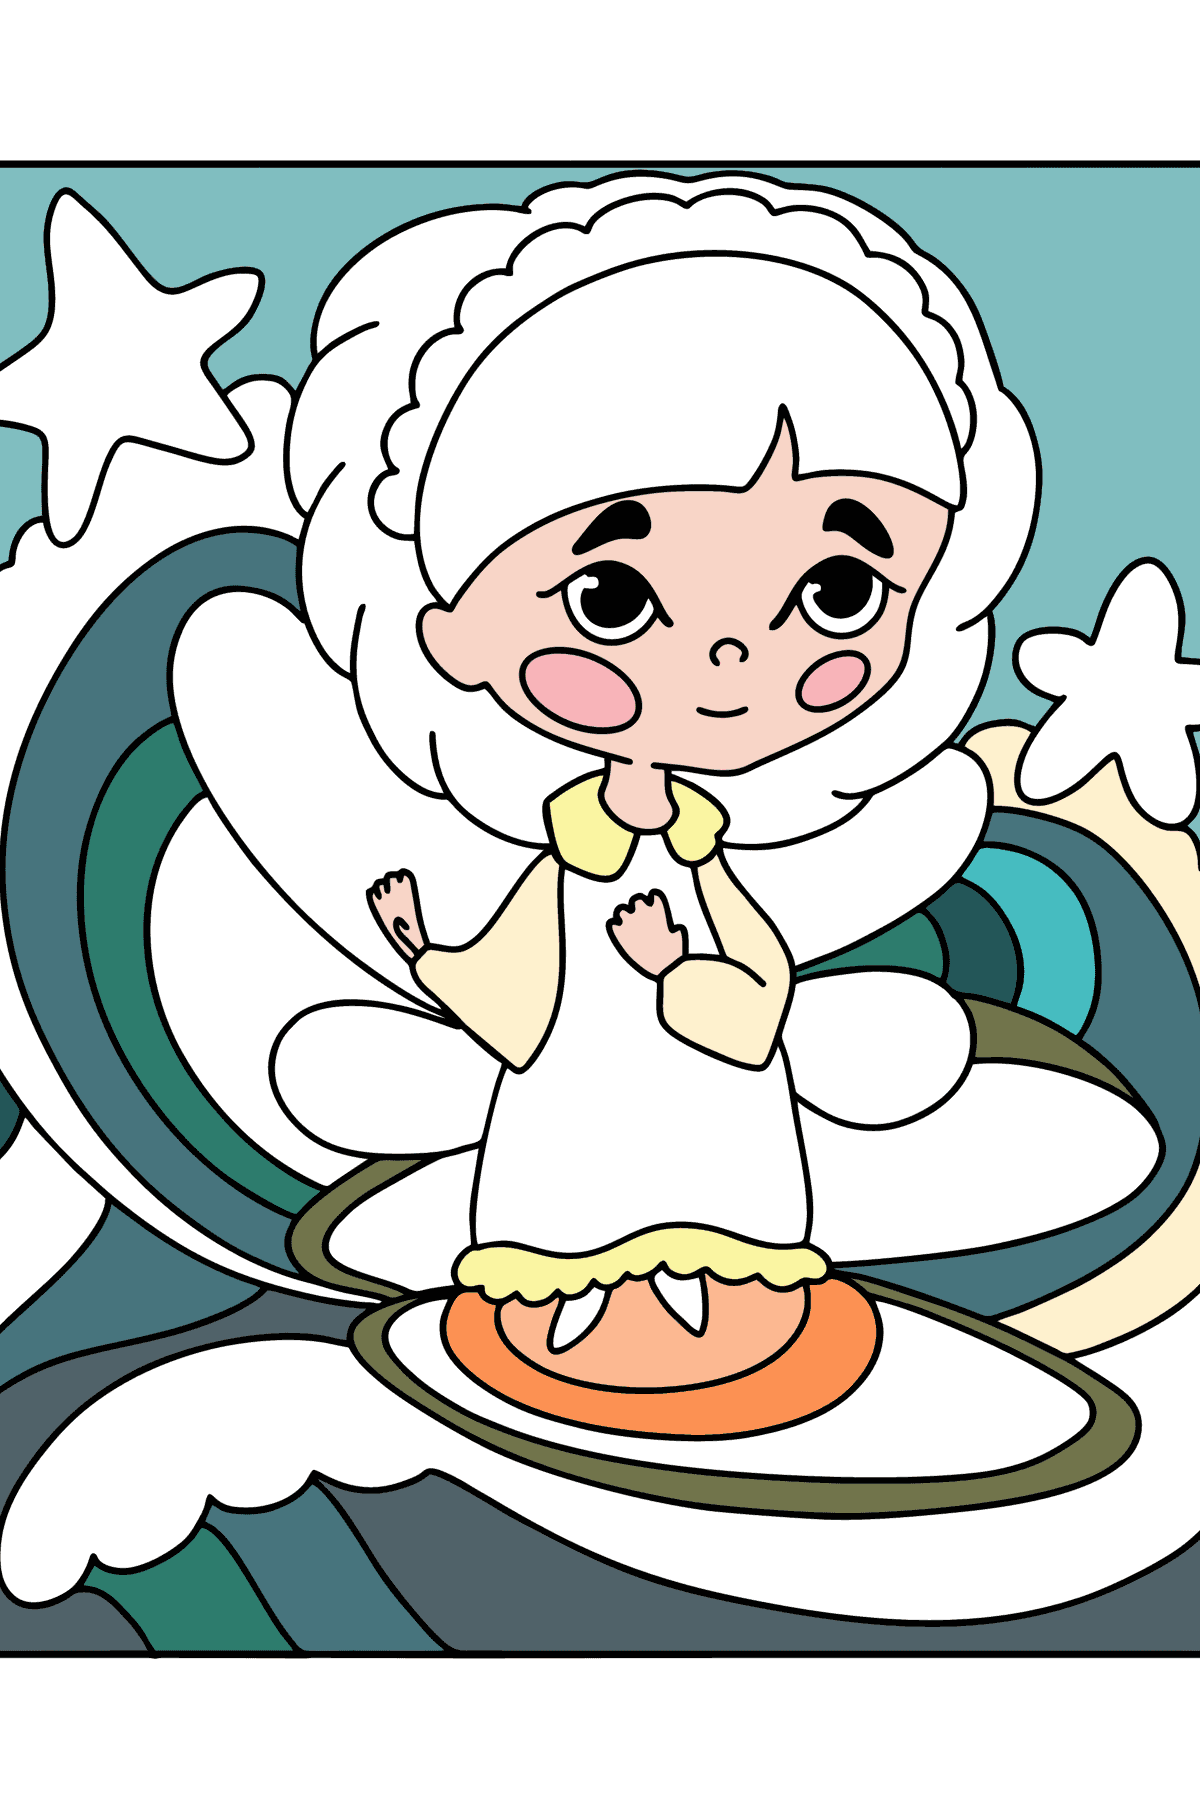 Sea Fairy coloring page - Coloring Pages for Kids